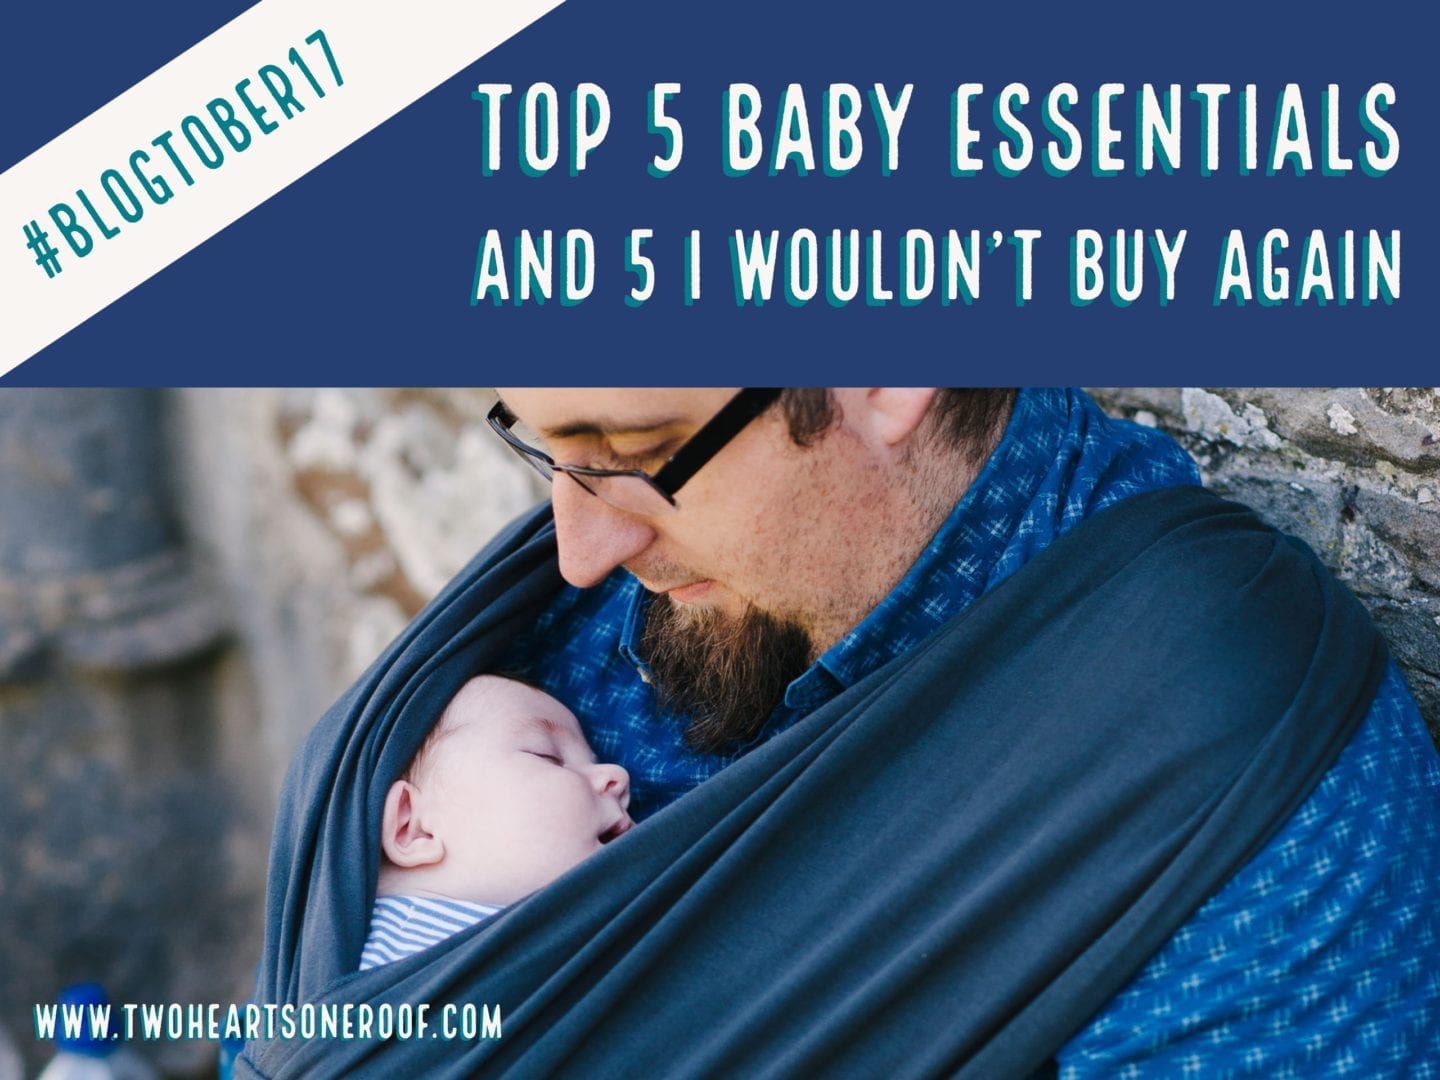 Top 5 Baby Essentials and 5 I Wouldn’t Buy Again – Blogtober 17